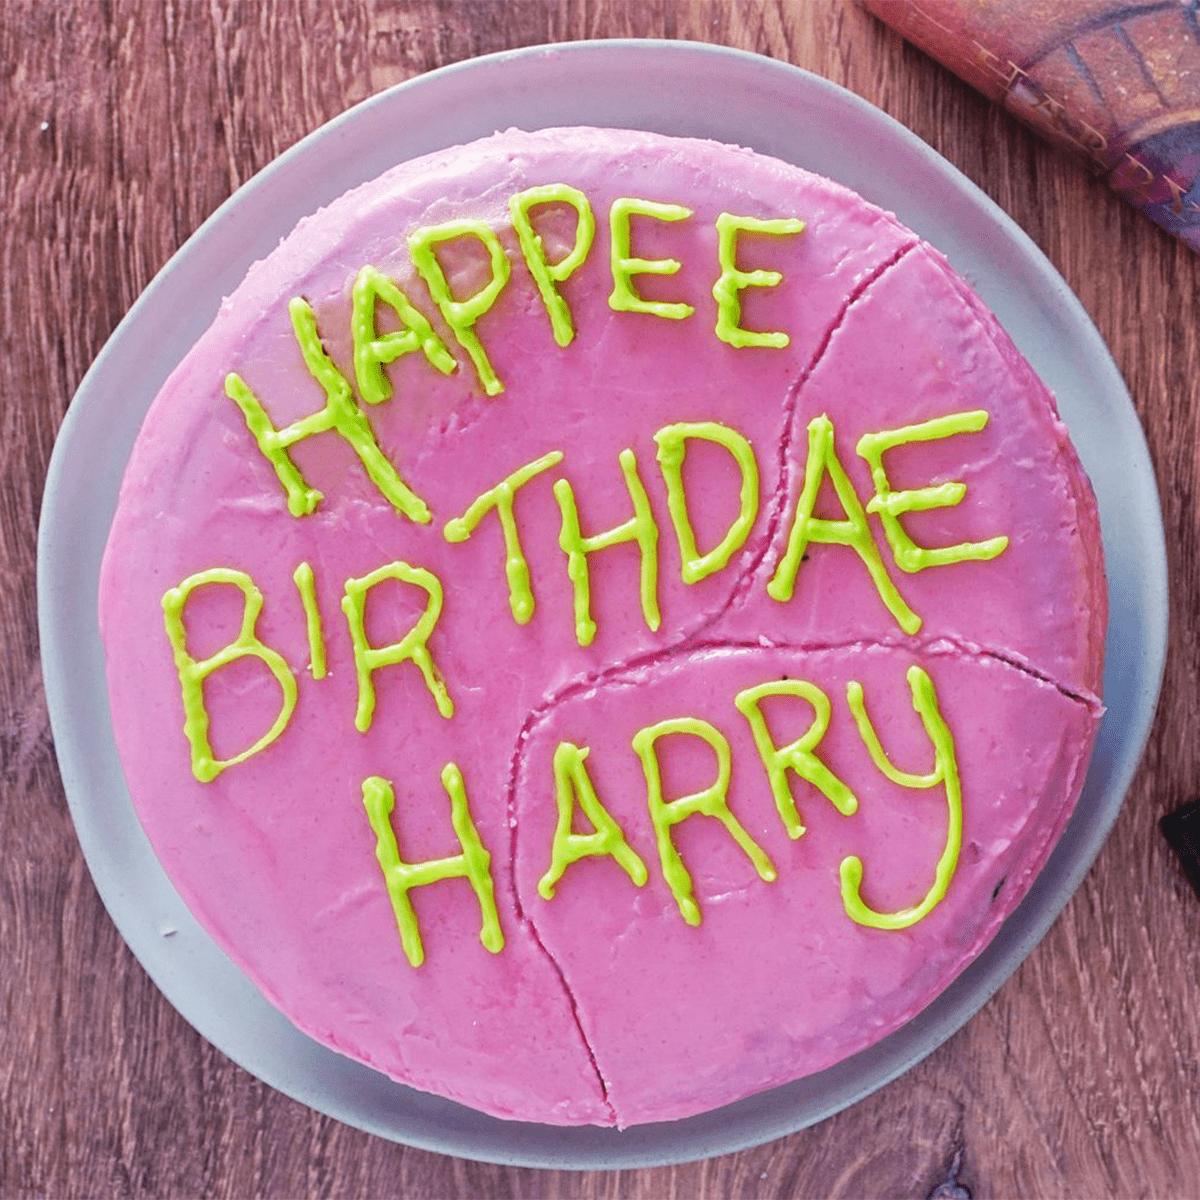 Here's How to Throw an Epic Harry Potter Birthday Party I Taste of